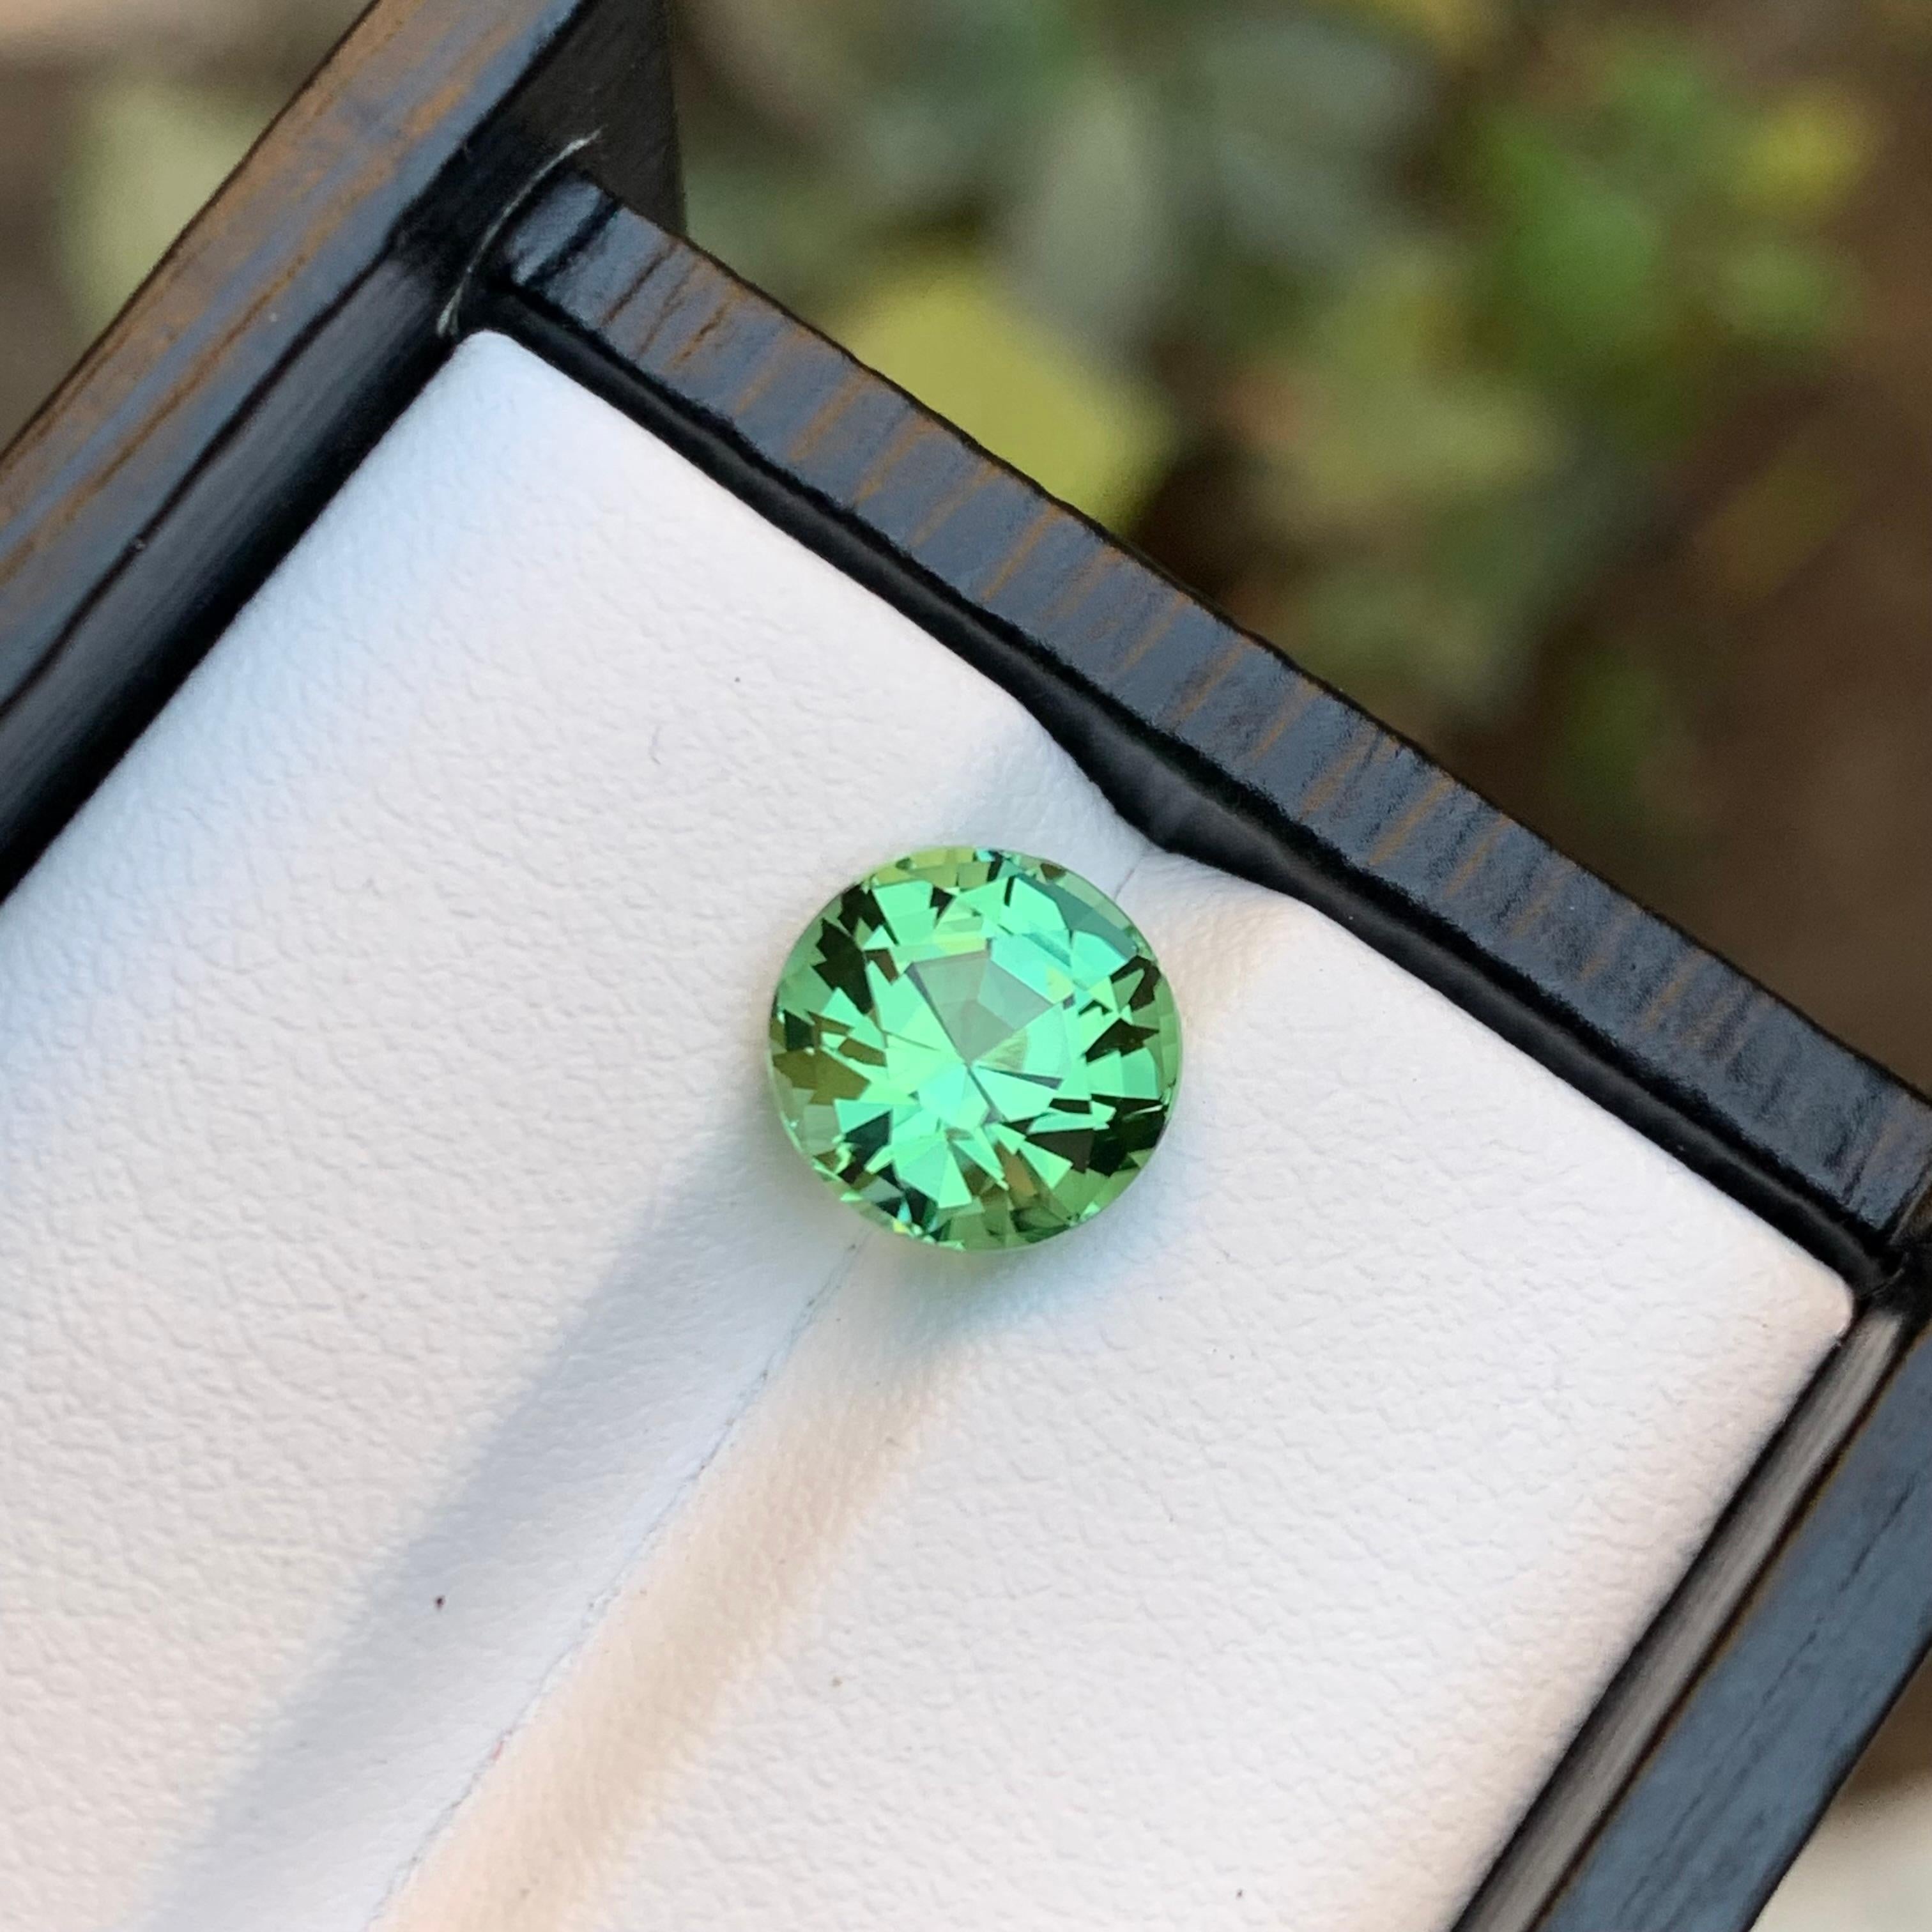 Contemporary Rare Mint Green Natural Tourmaline Loose Gemstone, 2.70 Ct Round Brilliant Cut  For Sale